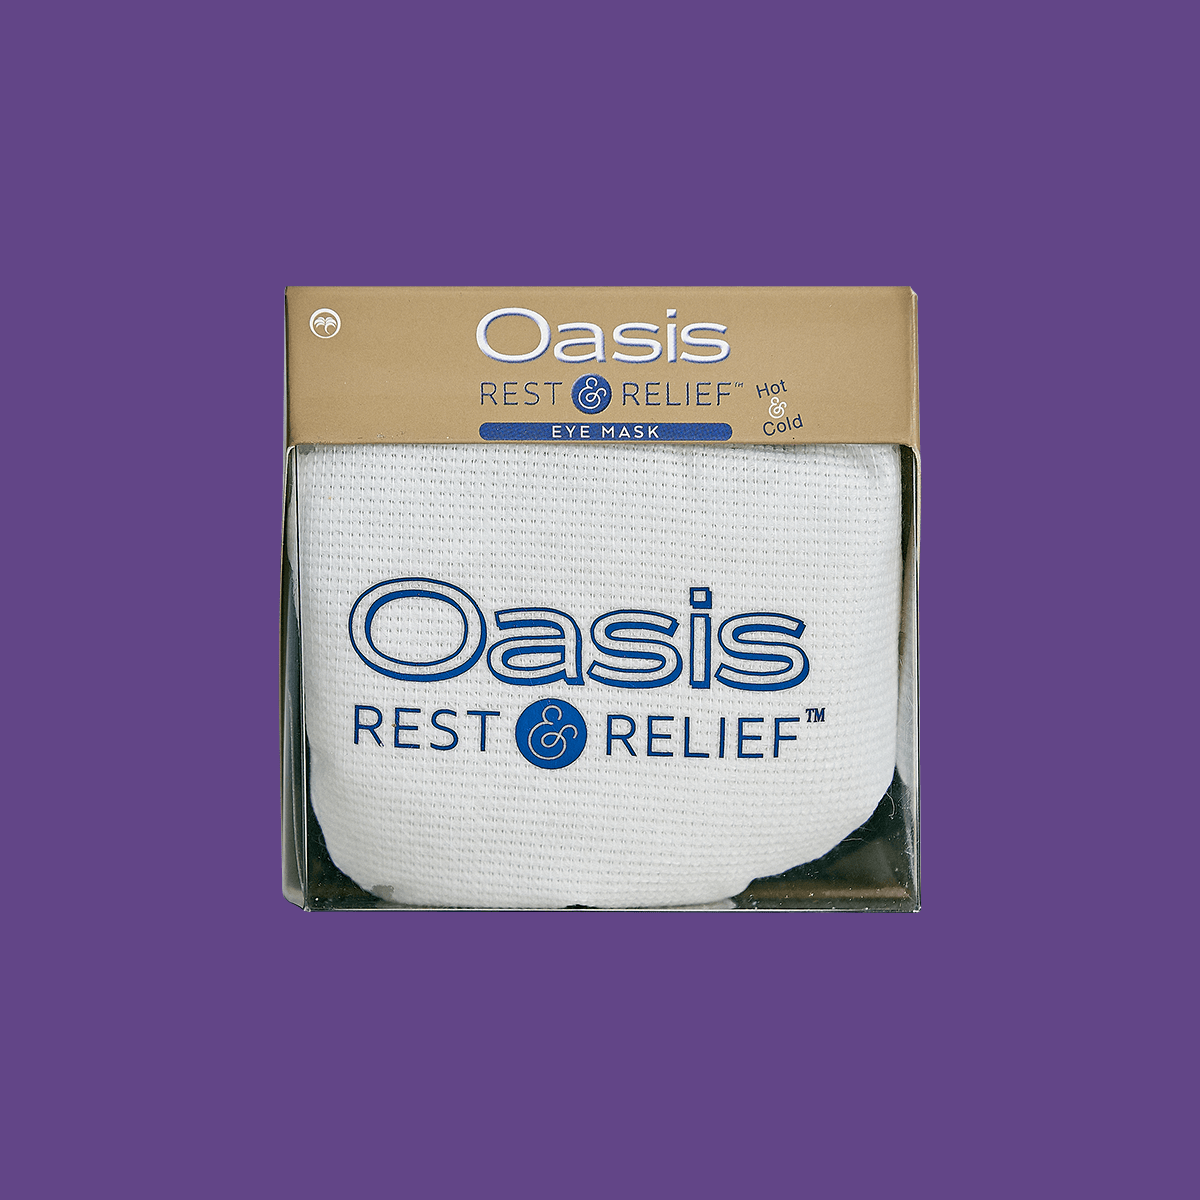 Oasis Hot & Cold Dry Eye & Allergy Mask - DryEye Rescue Store